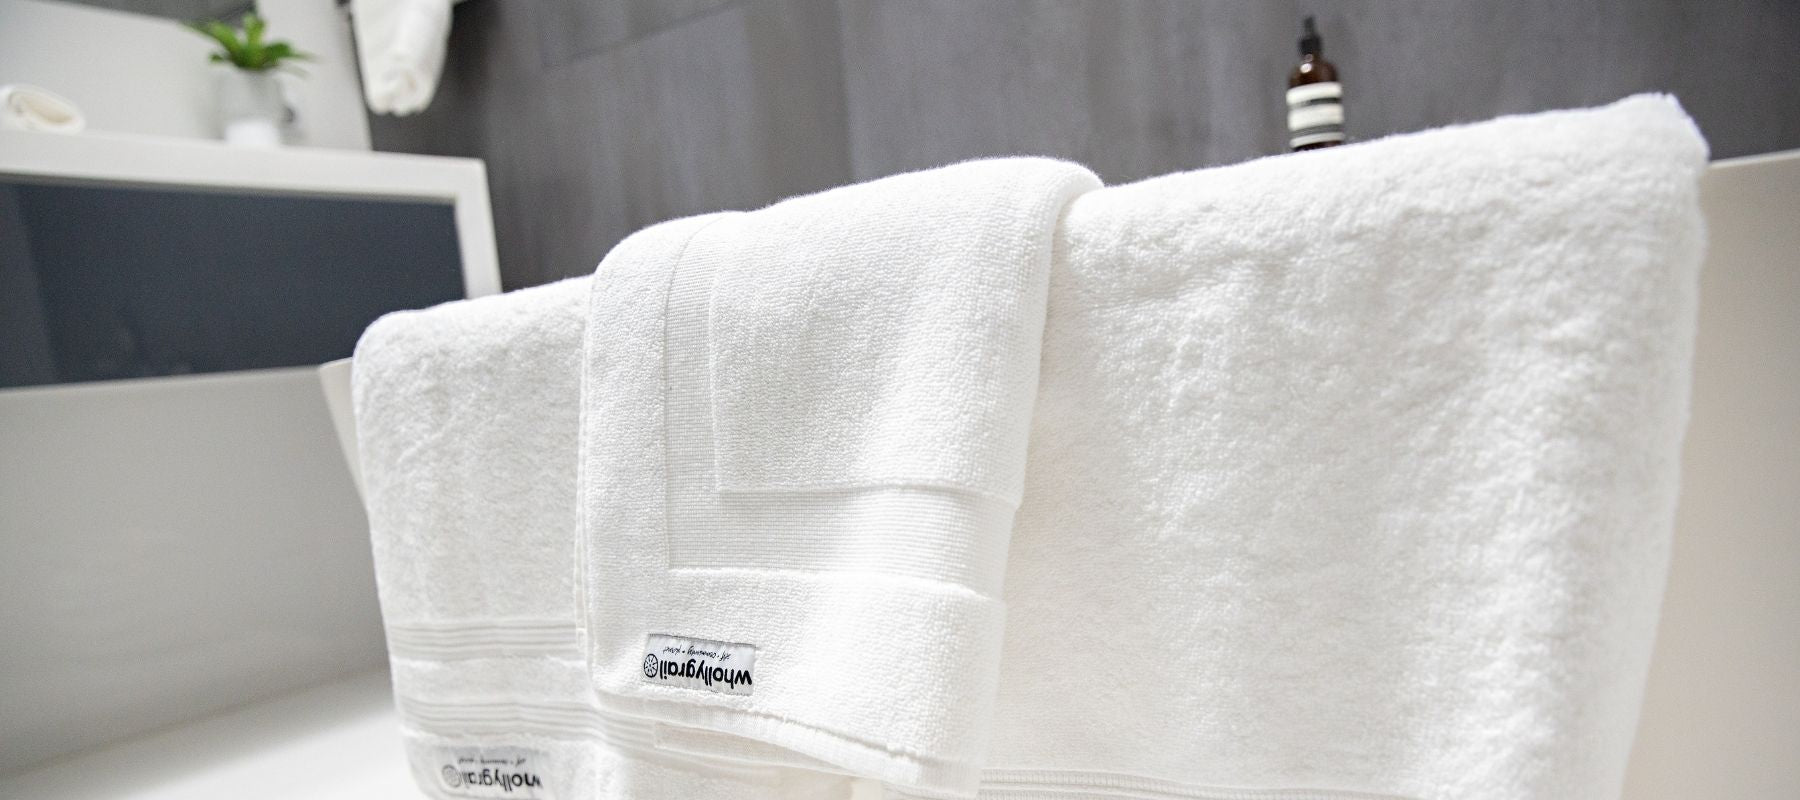 Monochromatic image of organic white Wholly Grail towels folded, close up on side of freestanding bath with basin, plant, hanging towel and beauty products in background.